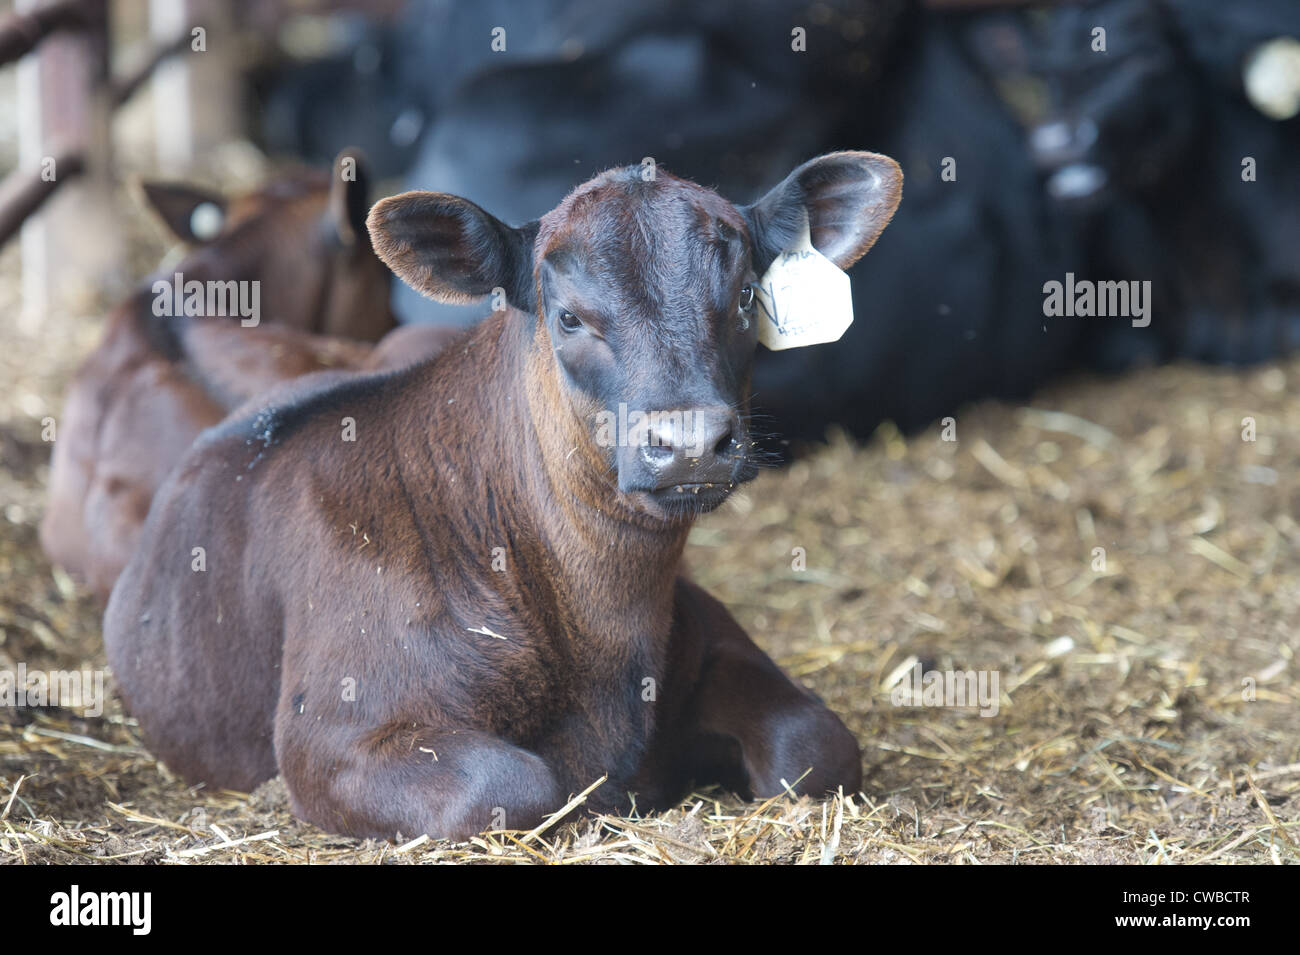 Beef cattle Stock Photo